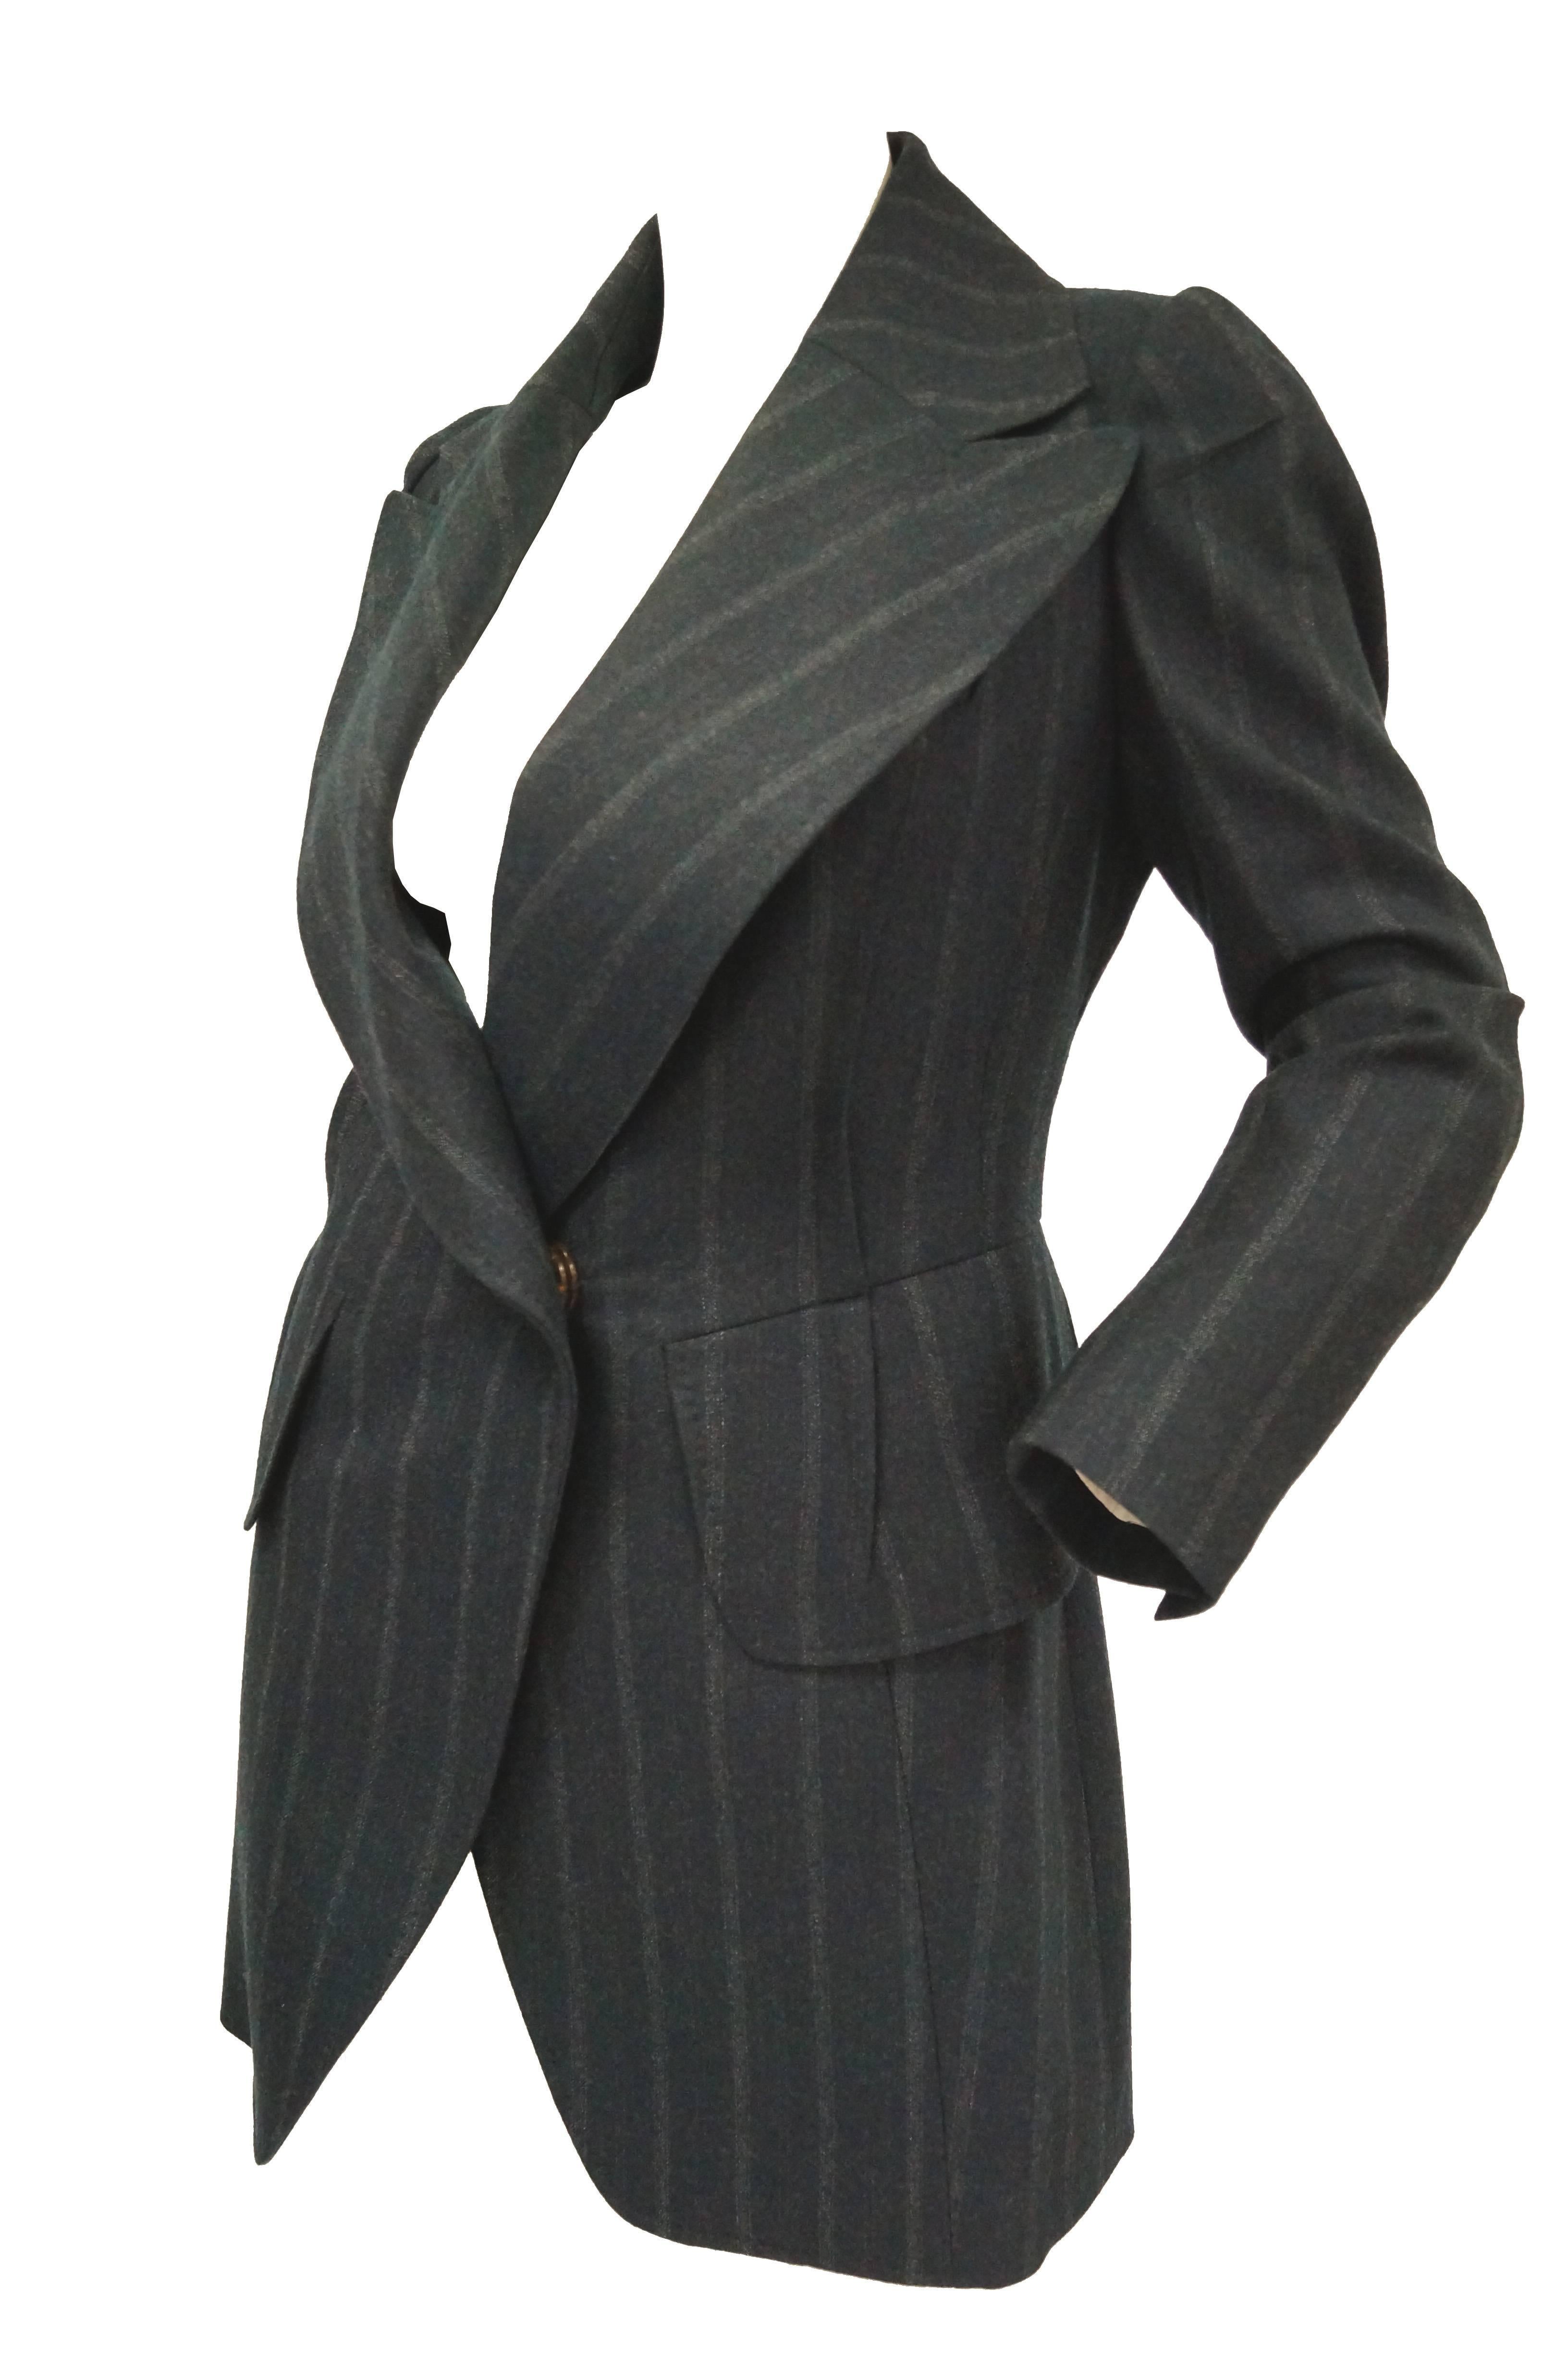 Original blank label Margiela blazer. The blazer features unique, artfully placed pleating. Pin stripes and a cinched torso accent the narrow waist of the wearer. Wide lapels and pocket flaps at the waist add drama to the not-so-classic blazer! Snap